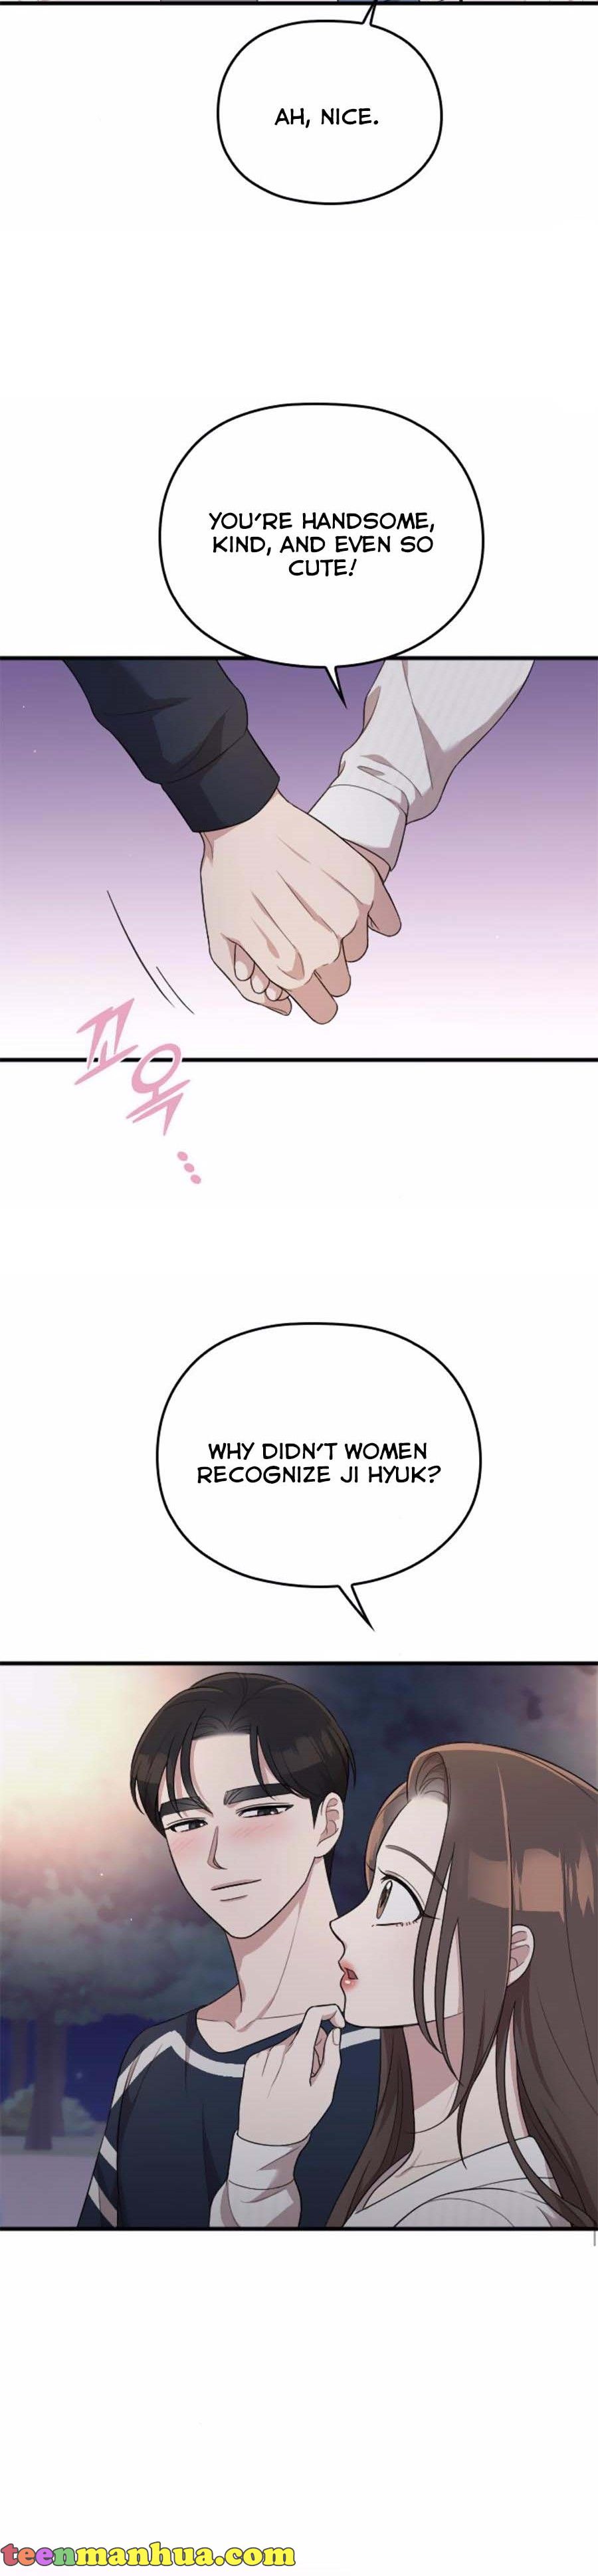 Marry My Husband - Page 2